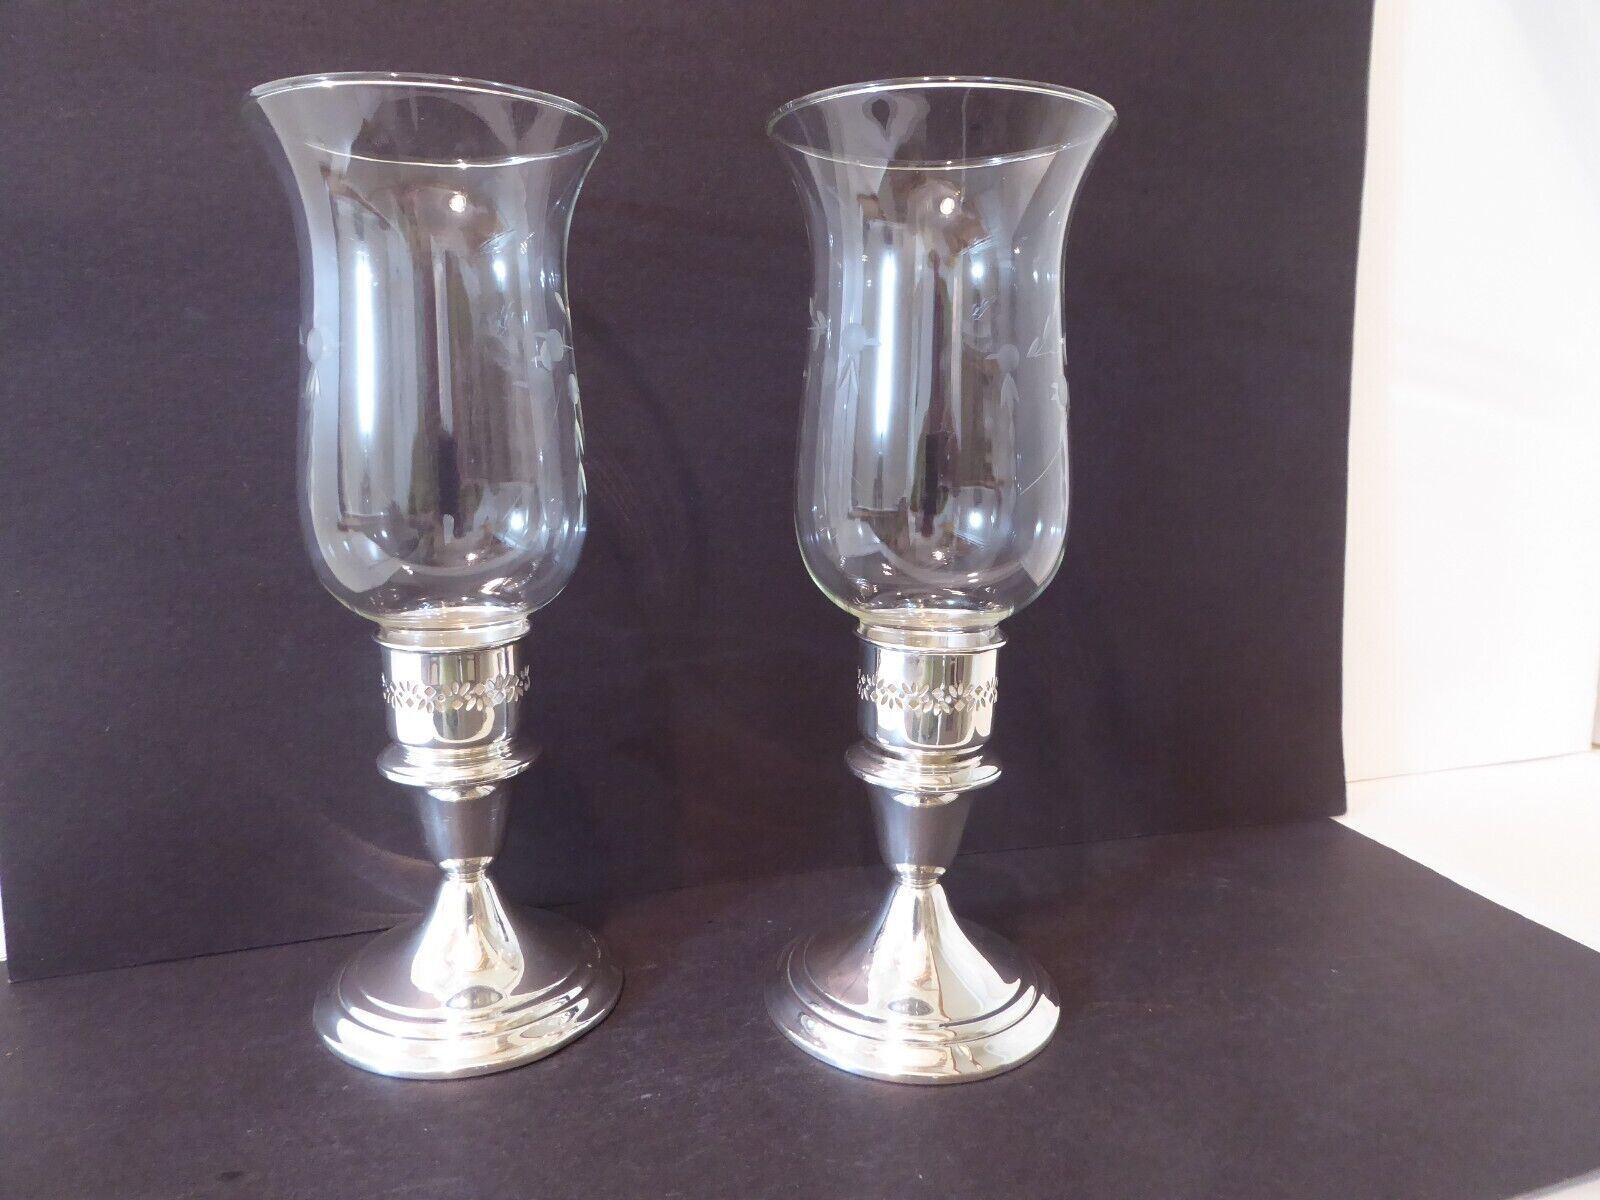 Gorham Silverplated Candleholders for Tapers, Glass Hurricanes, YC3003   (S3